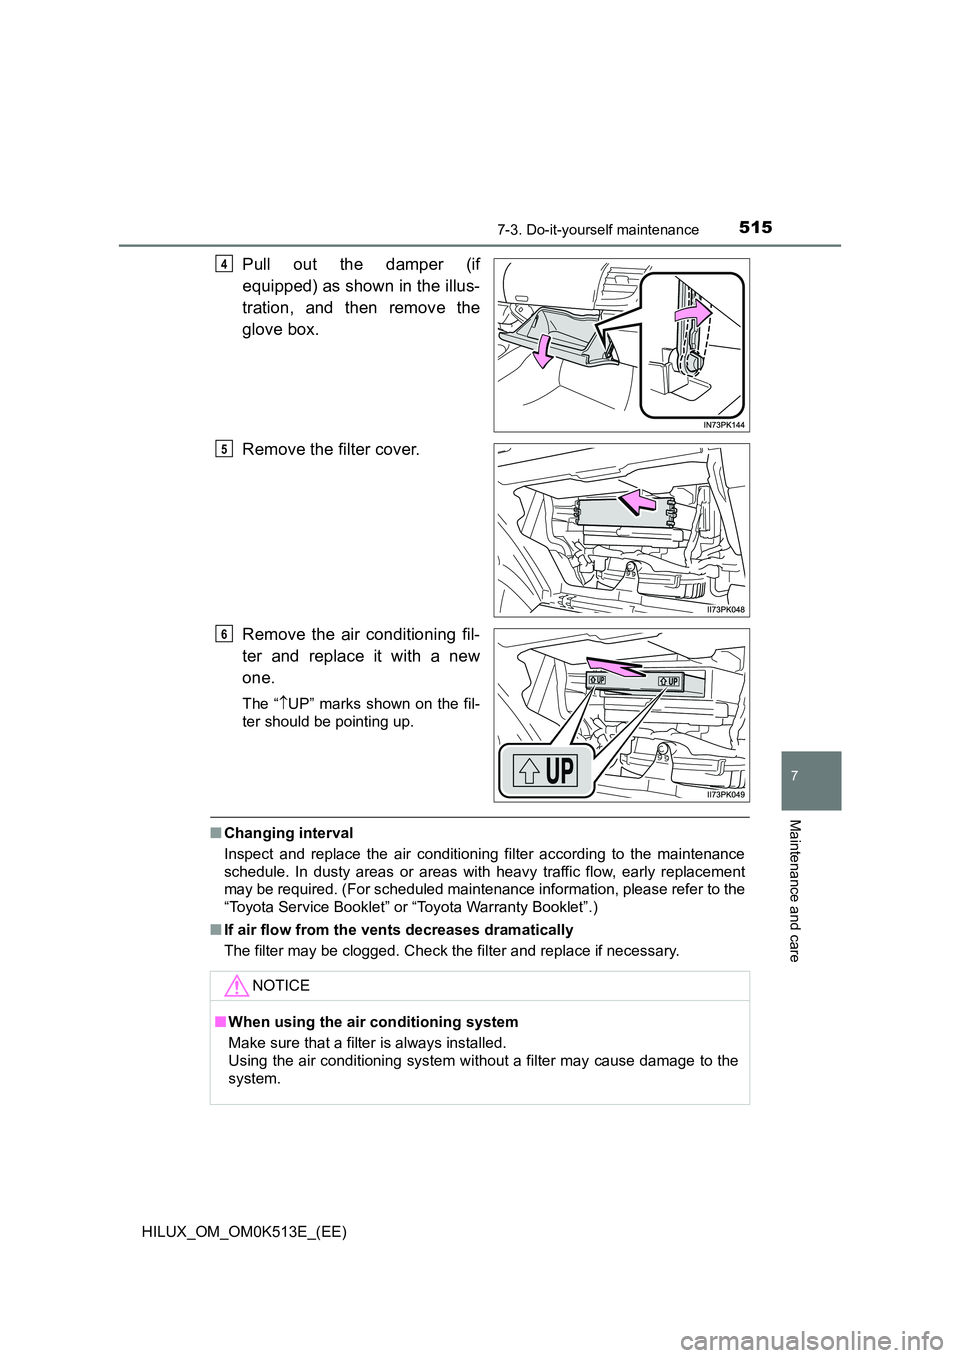 TOYOTA HILUX 2021  Owners Manual (in English) 5157-3. Do-it-yourself maintenance
HILUX_OM_OM0K513E_(EE)
7
Maintenance and care
Pull out the damper (if 
equipped) as shown in the illus- 
tration, and then remove the 
glove box. 
Remove the filter 